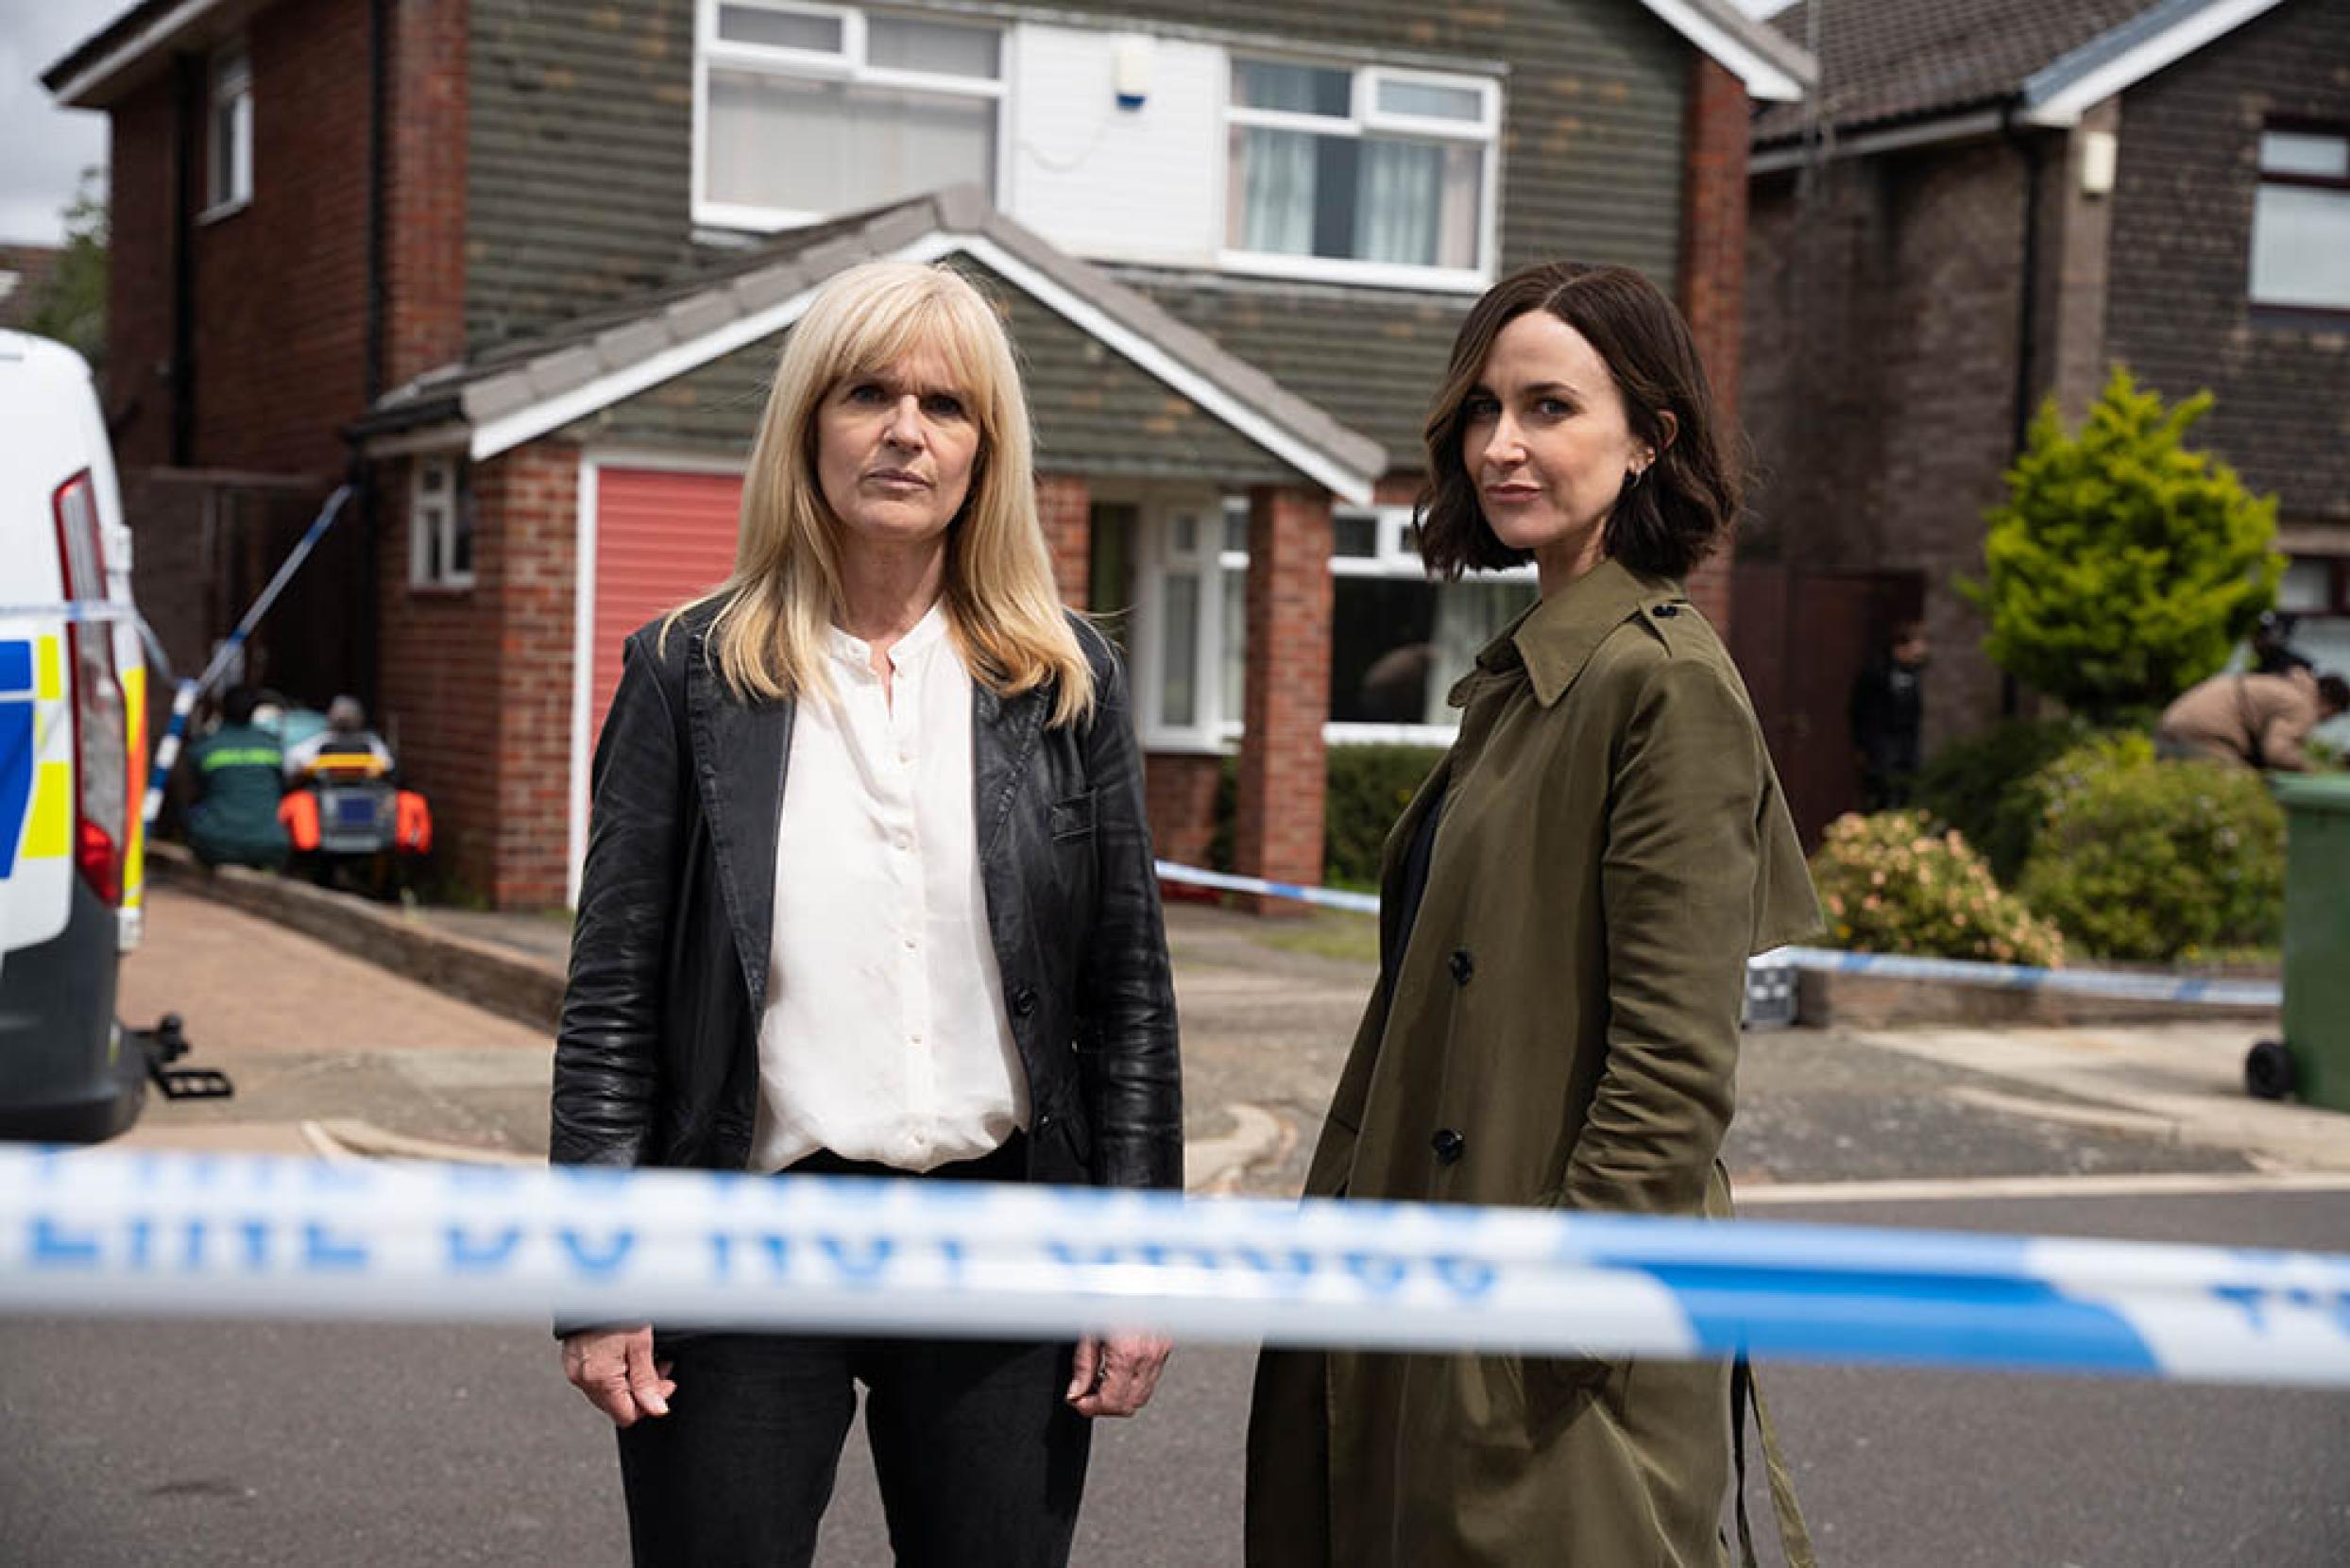 ITV commissions thriller, Protection, starring Siobhan Finneran, Nadine Marshall & Katherine Kelly